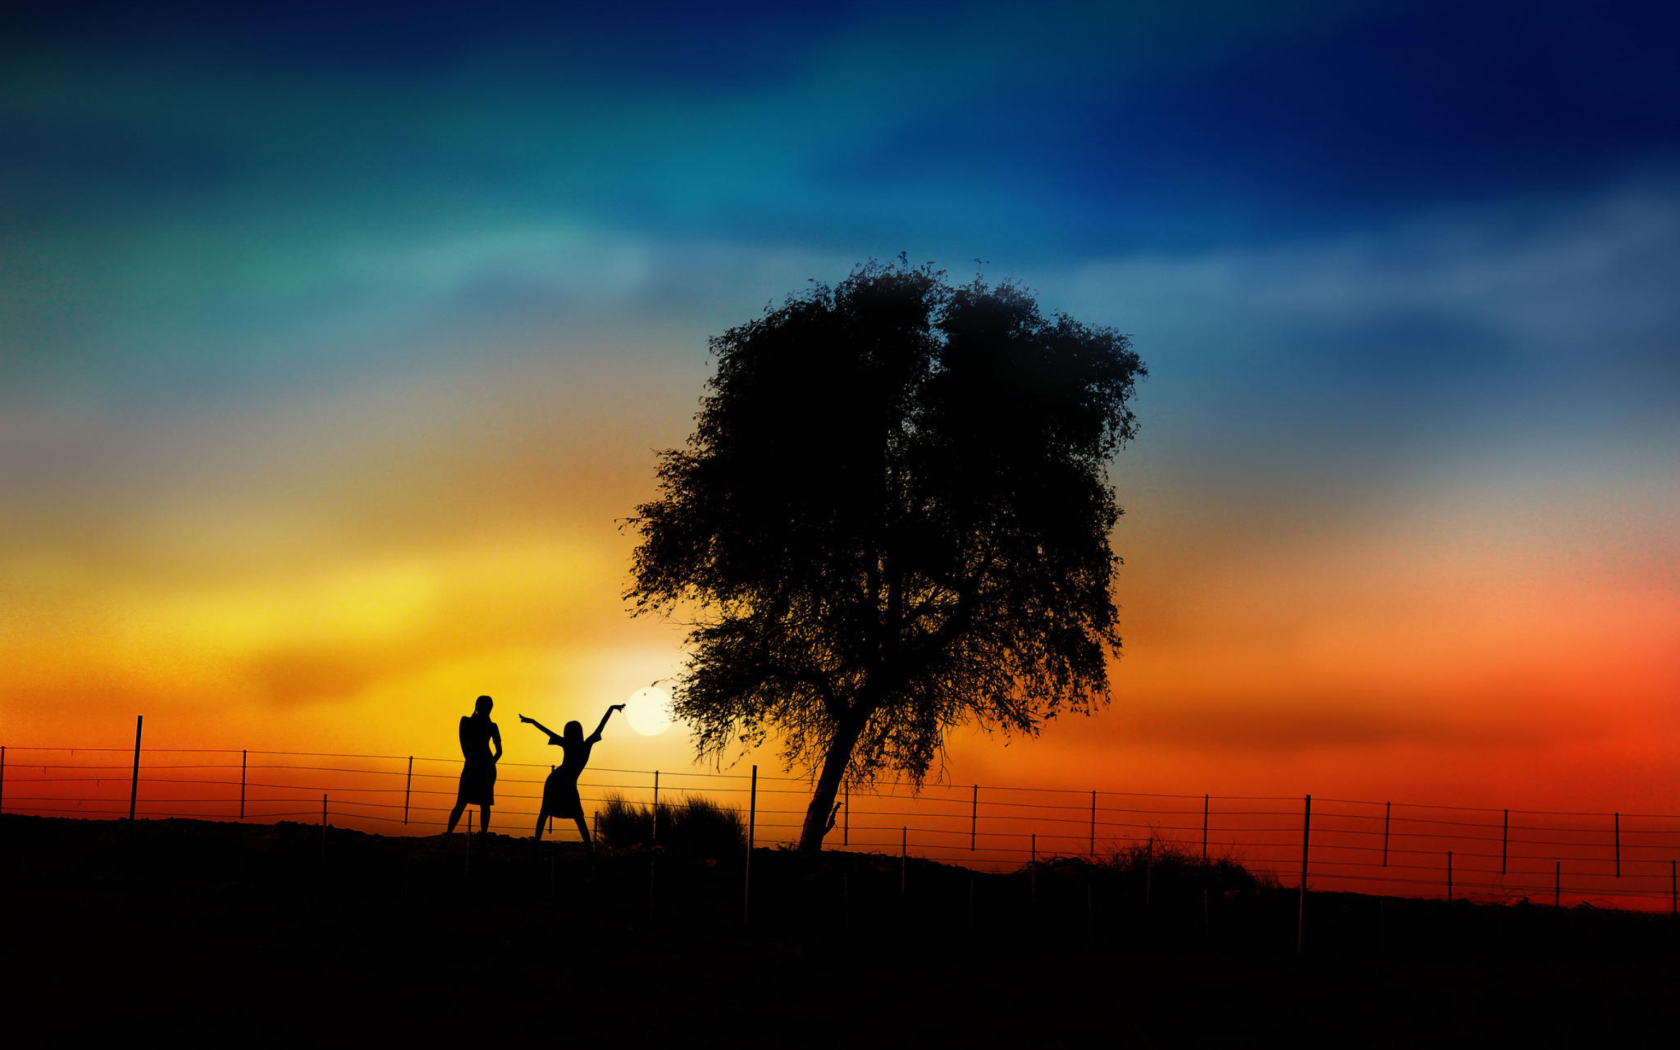 Das Couple Silhouettes Under Tree At Sunset Wallpaper 1680x1050